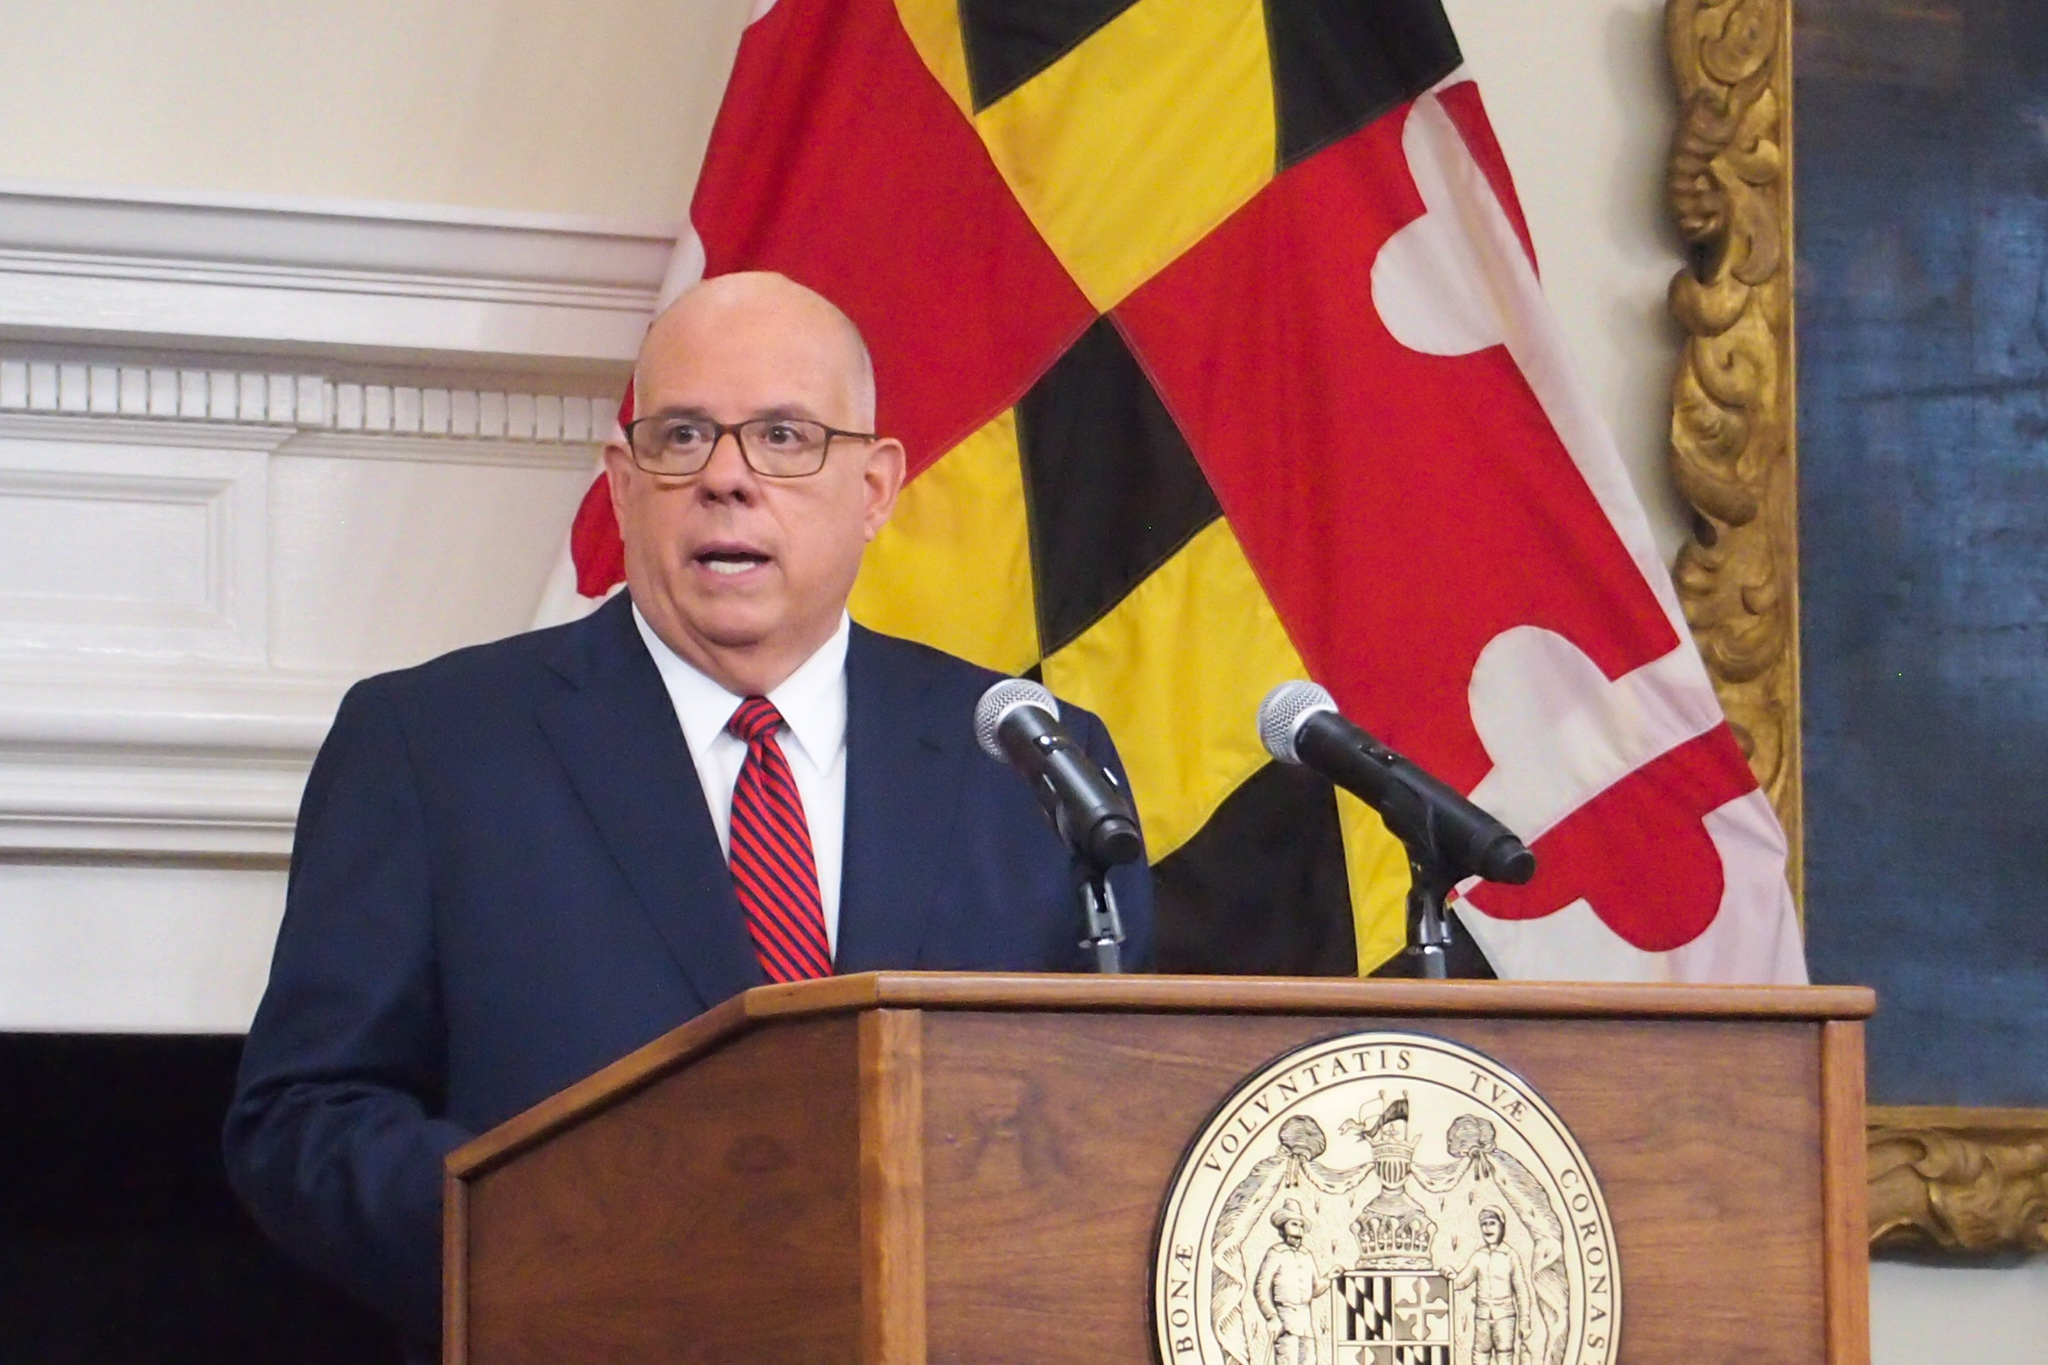 Hogan stands at podium speaking into a microphone with a Maryland flag behind him.